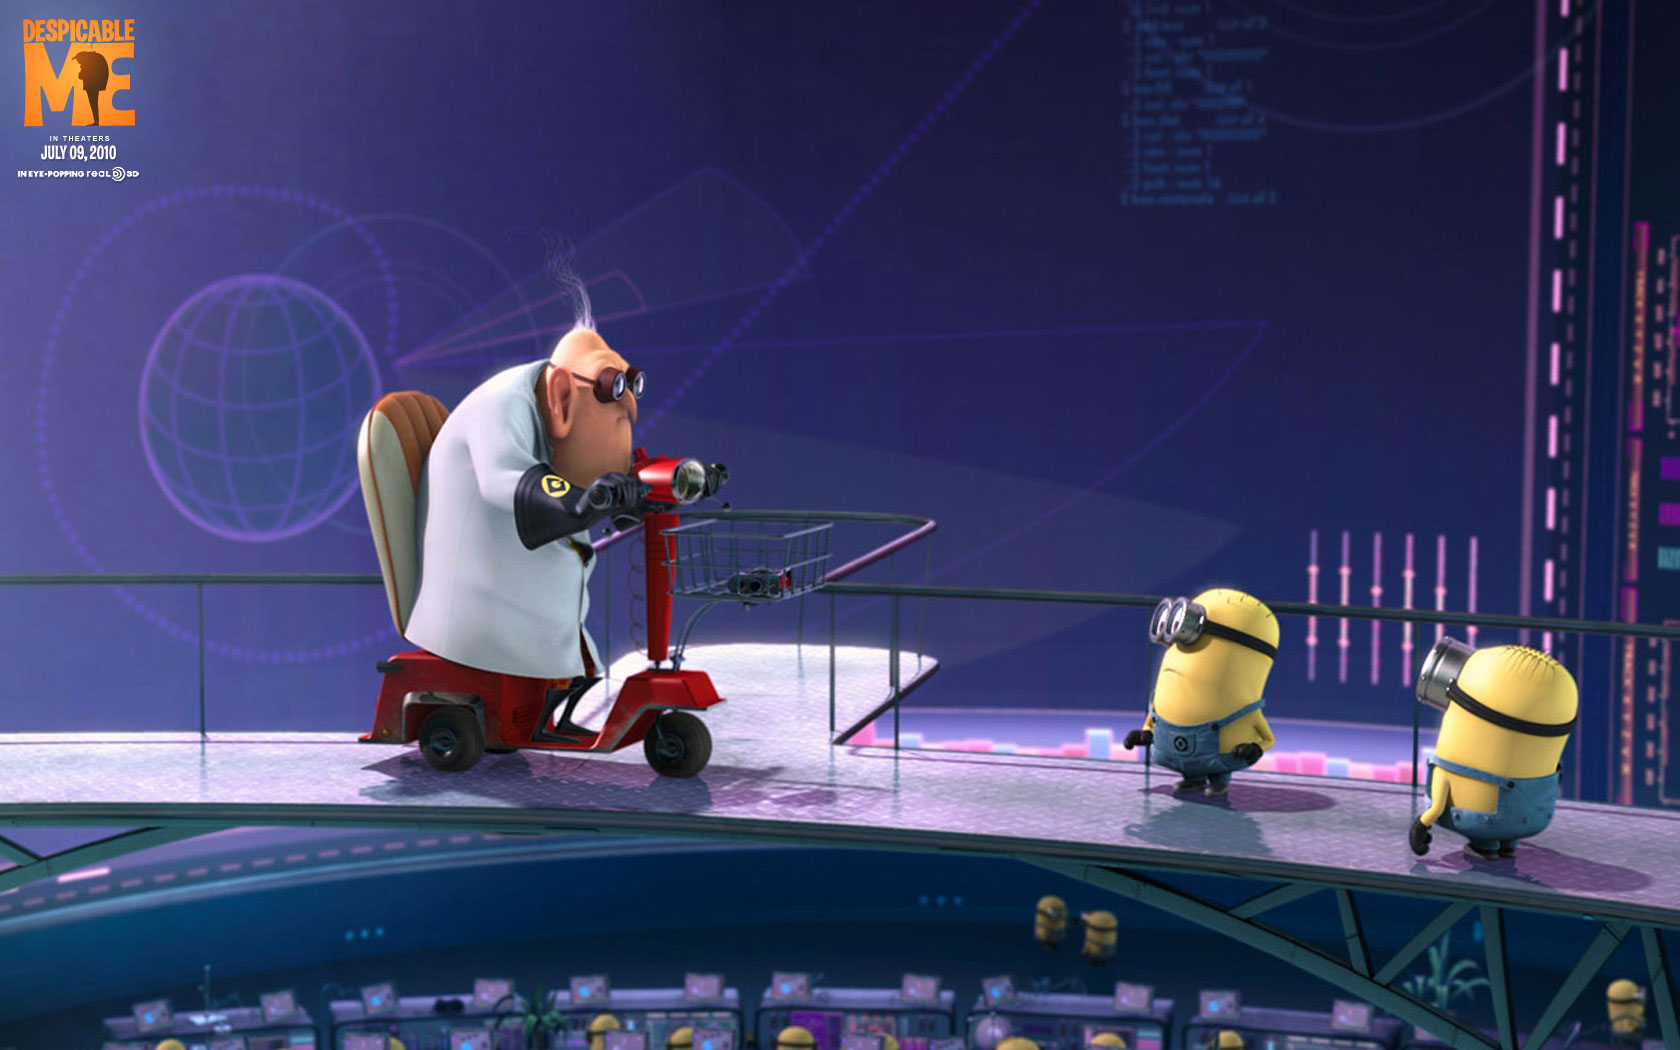 ɵҡdespicable me(ֽ11)